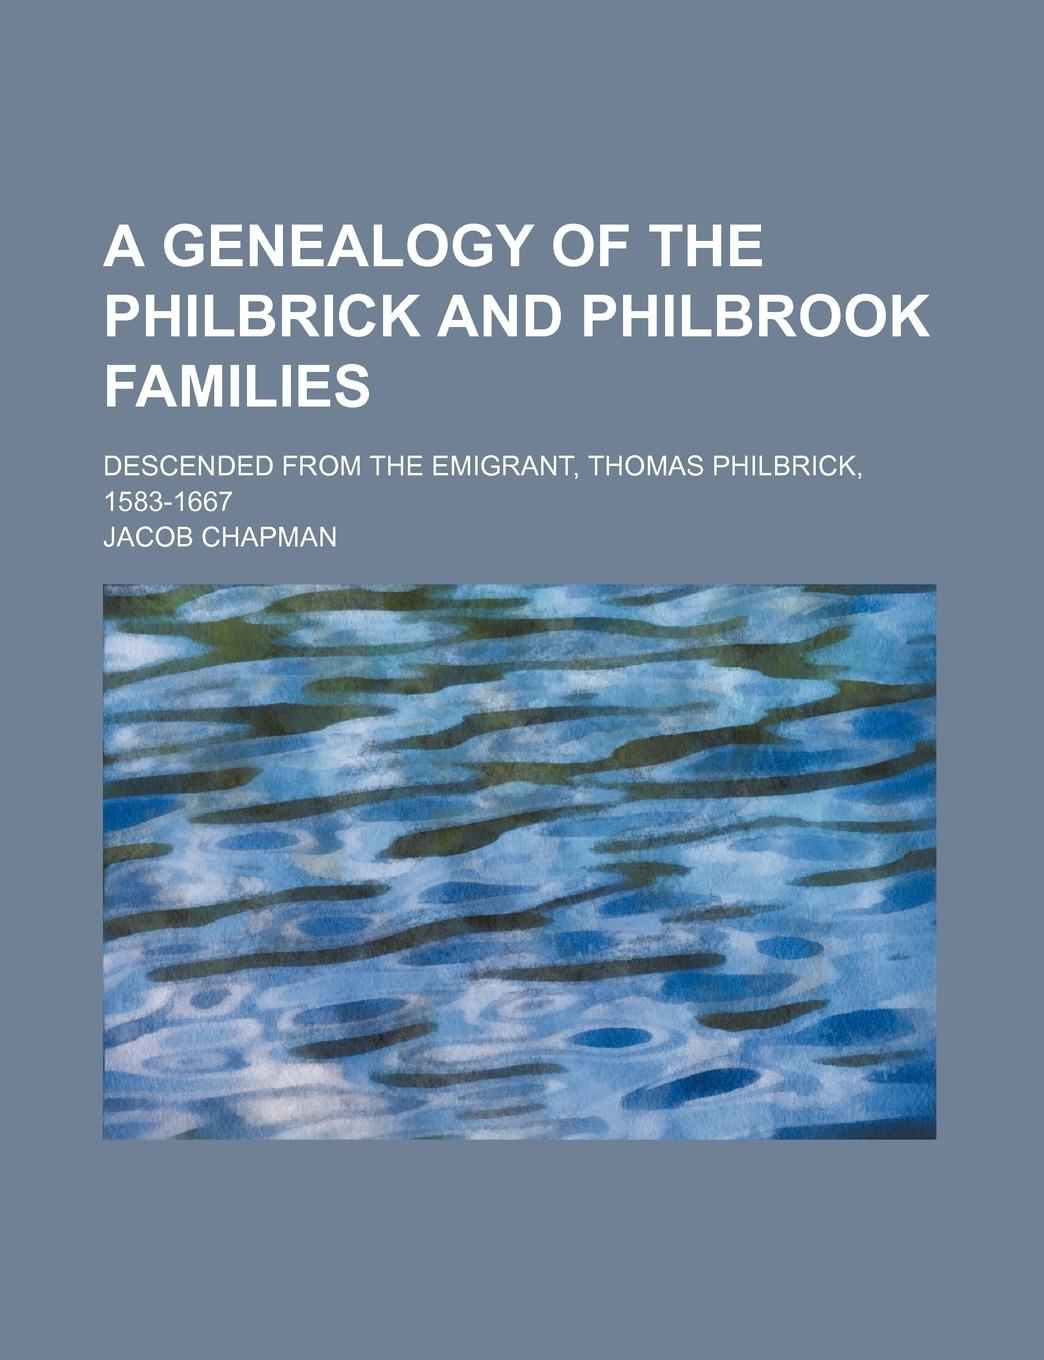 Jacob Chapman A Genealogy of the Philbrick and Philbrook Families; Descended from the Emigrant, Thomas Philbrick, 1583-1667